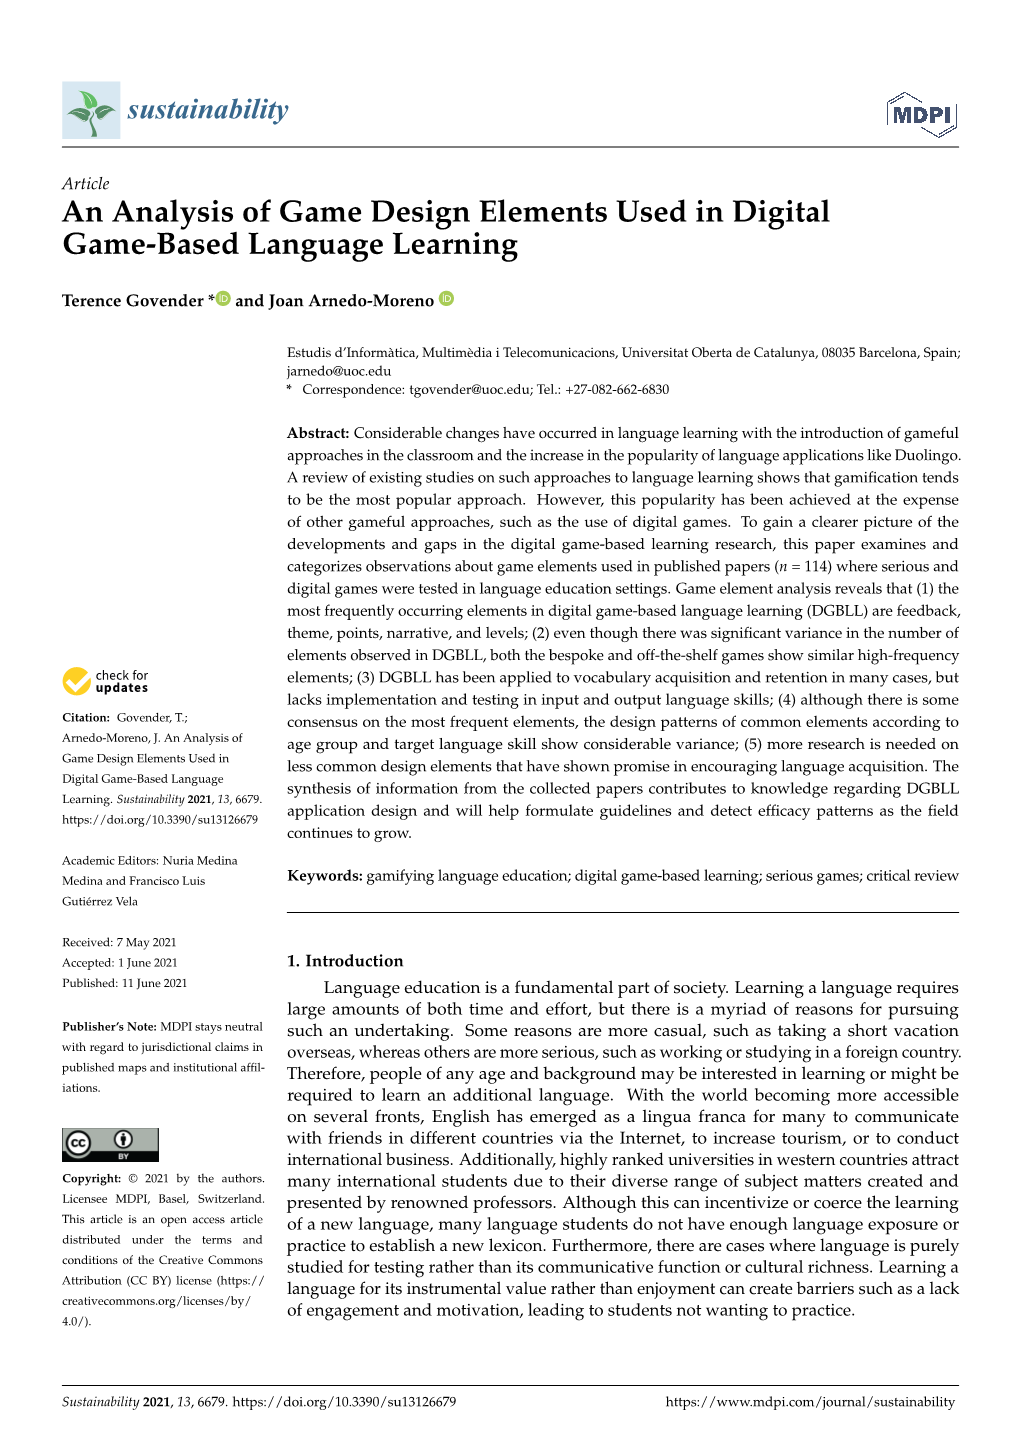 An Analysis of Game Design Elements Used in Digital Game-Based Language Learning